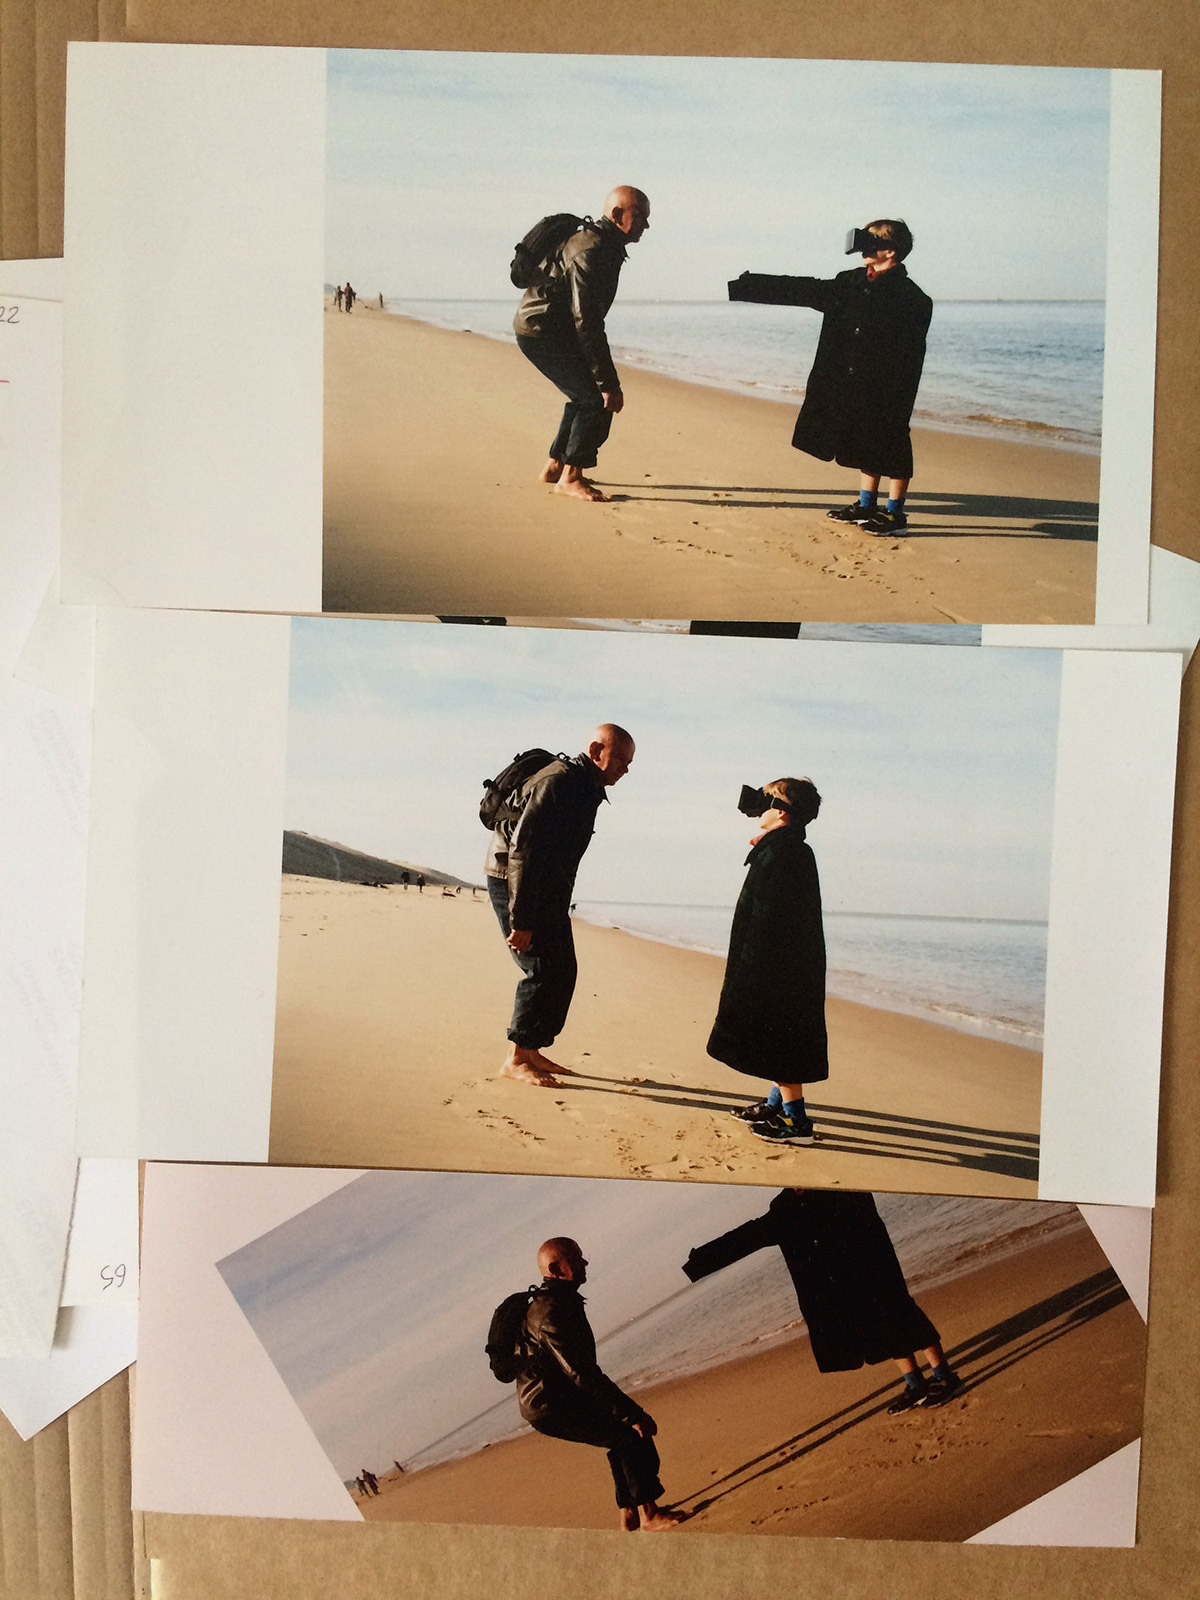 My father, Tatus, and my little brother fooling around with reality on the Dune du Pilat beach, published in an editorial for* M le Monde*. *{Styling by Anna Schiffel. Photo assistant : François Briens}* - © Maciek Pożoga